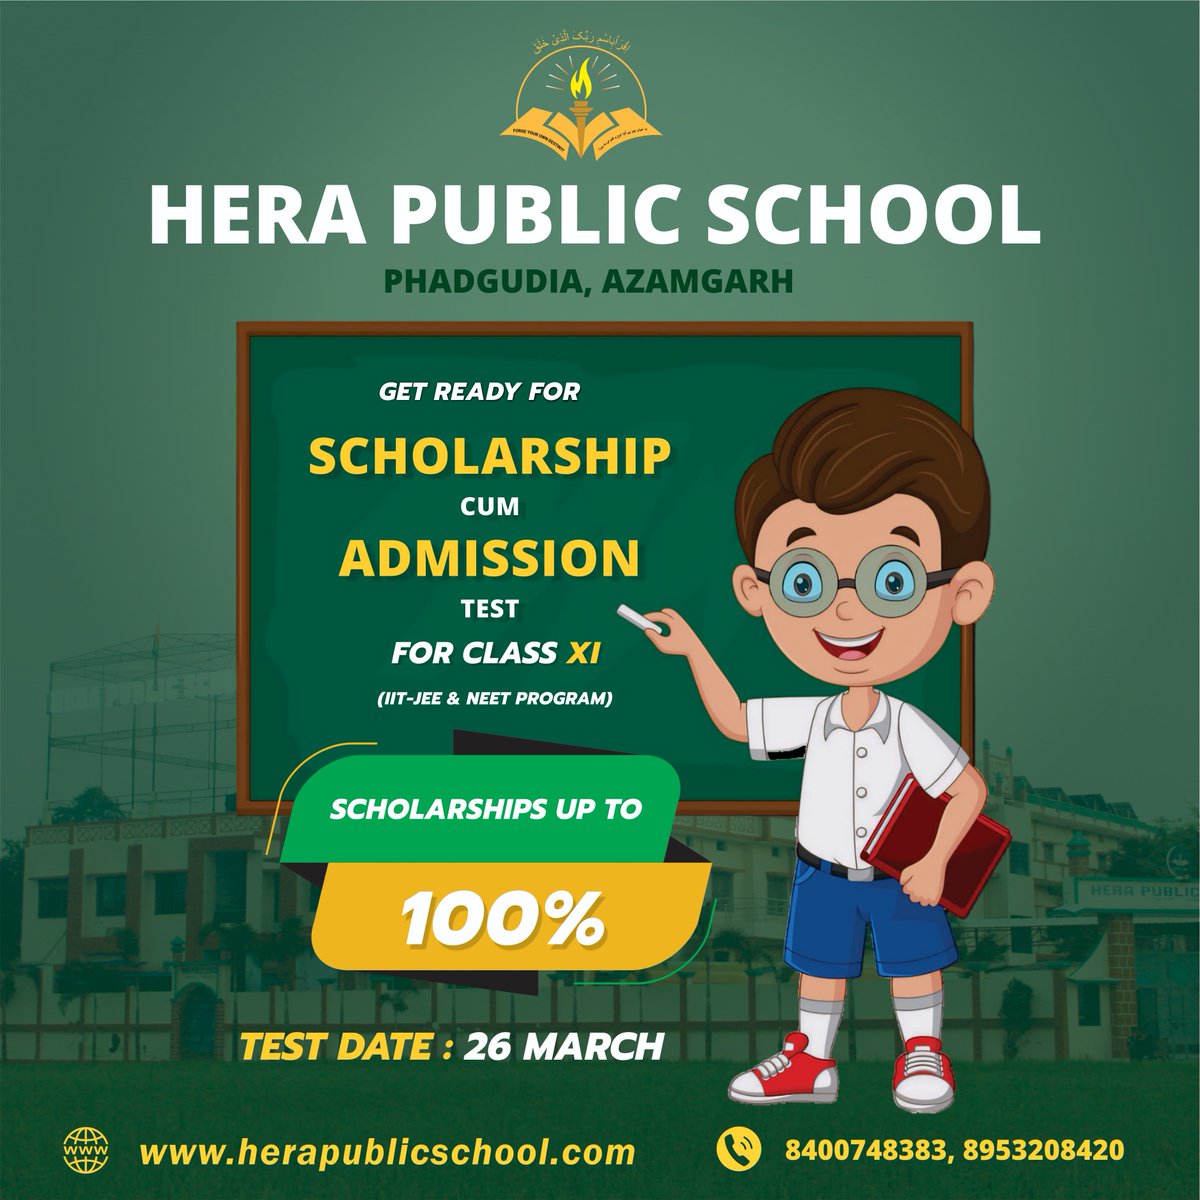 Unlock your future! Get ready for the scholarship cum admission test for Class XI (IIT-JEE & NEET PROGRAM) with scholarships up to 100%.
Click here for further details for class XI
herapublicschool.com/public/asset/u…

#ScholarshipTest #AdmissionTest #ClassXI #IITJEE #NEET